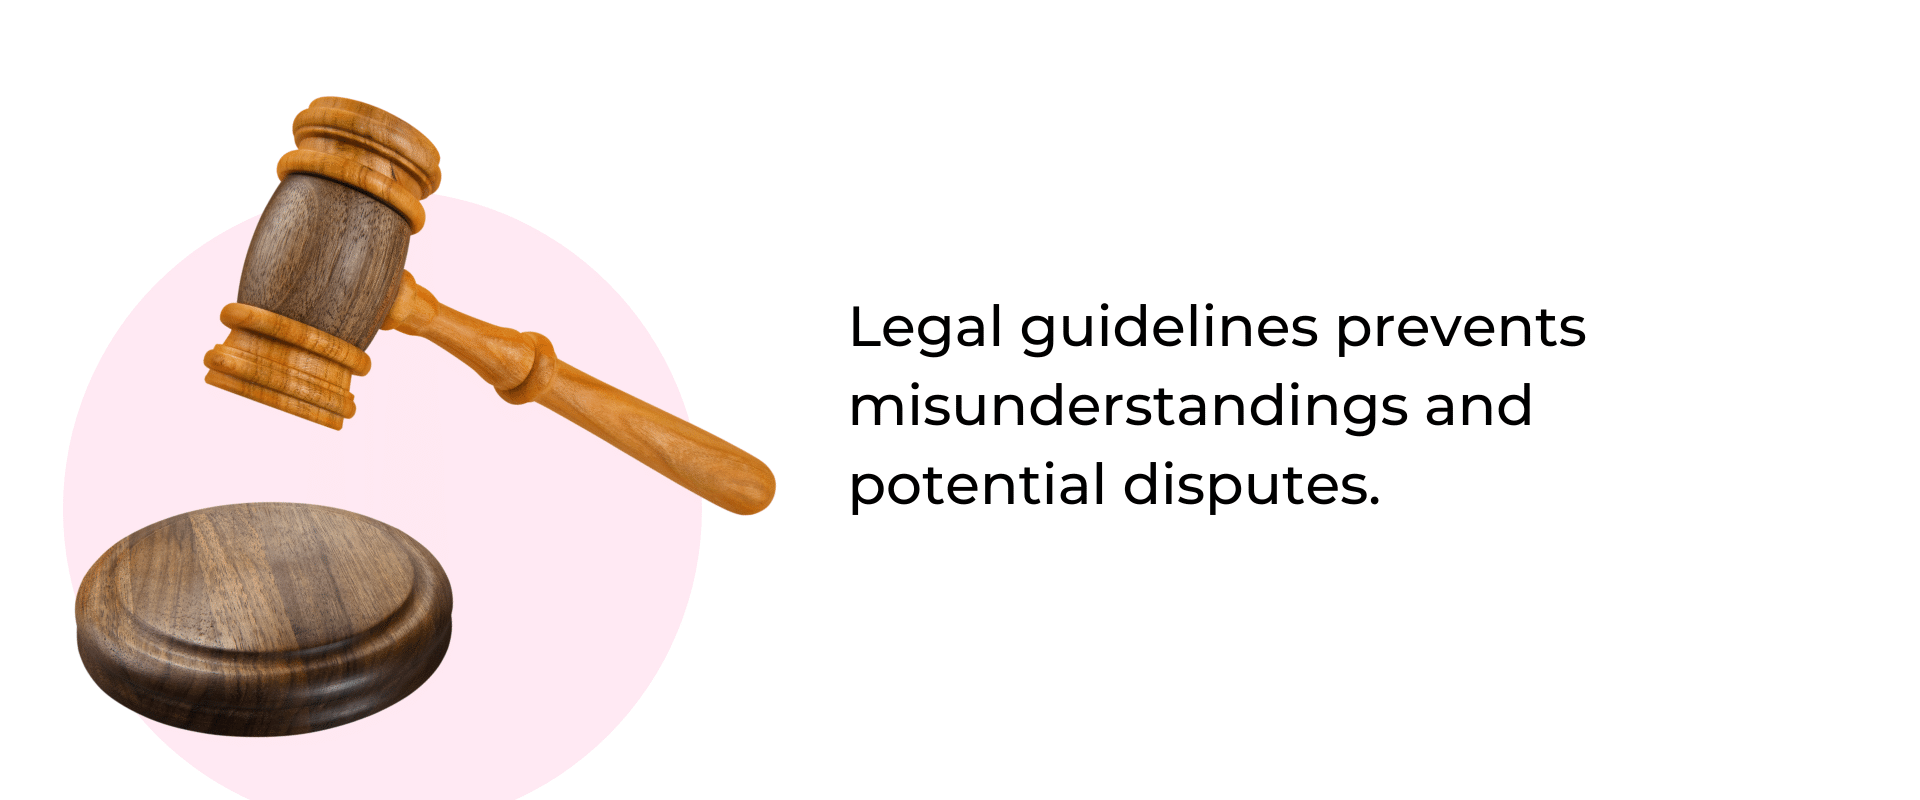 Legal guidelines prevents misunderstandings and potential disputes.